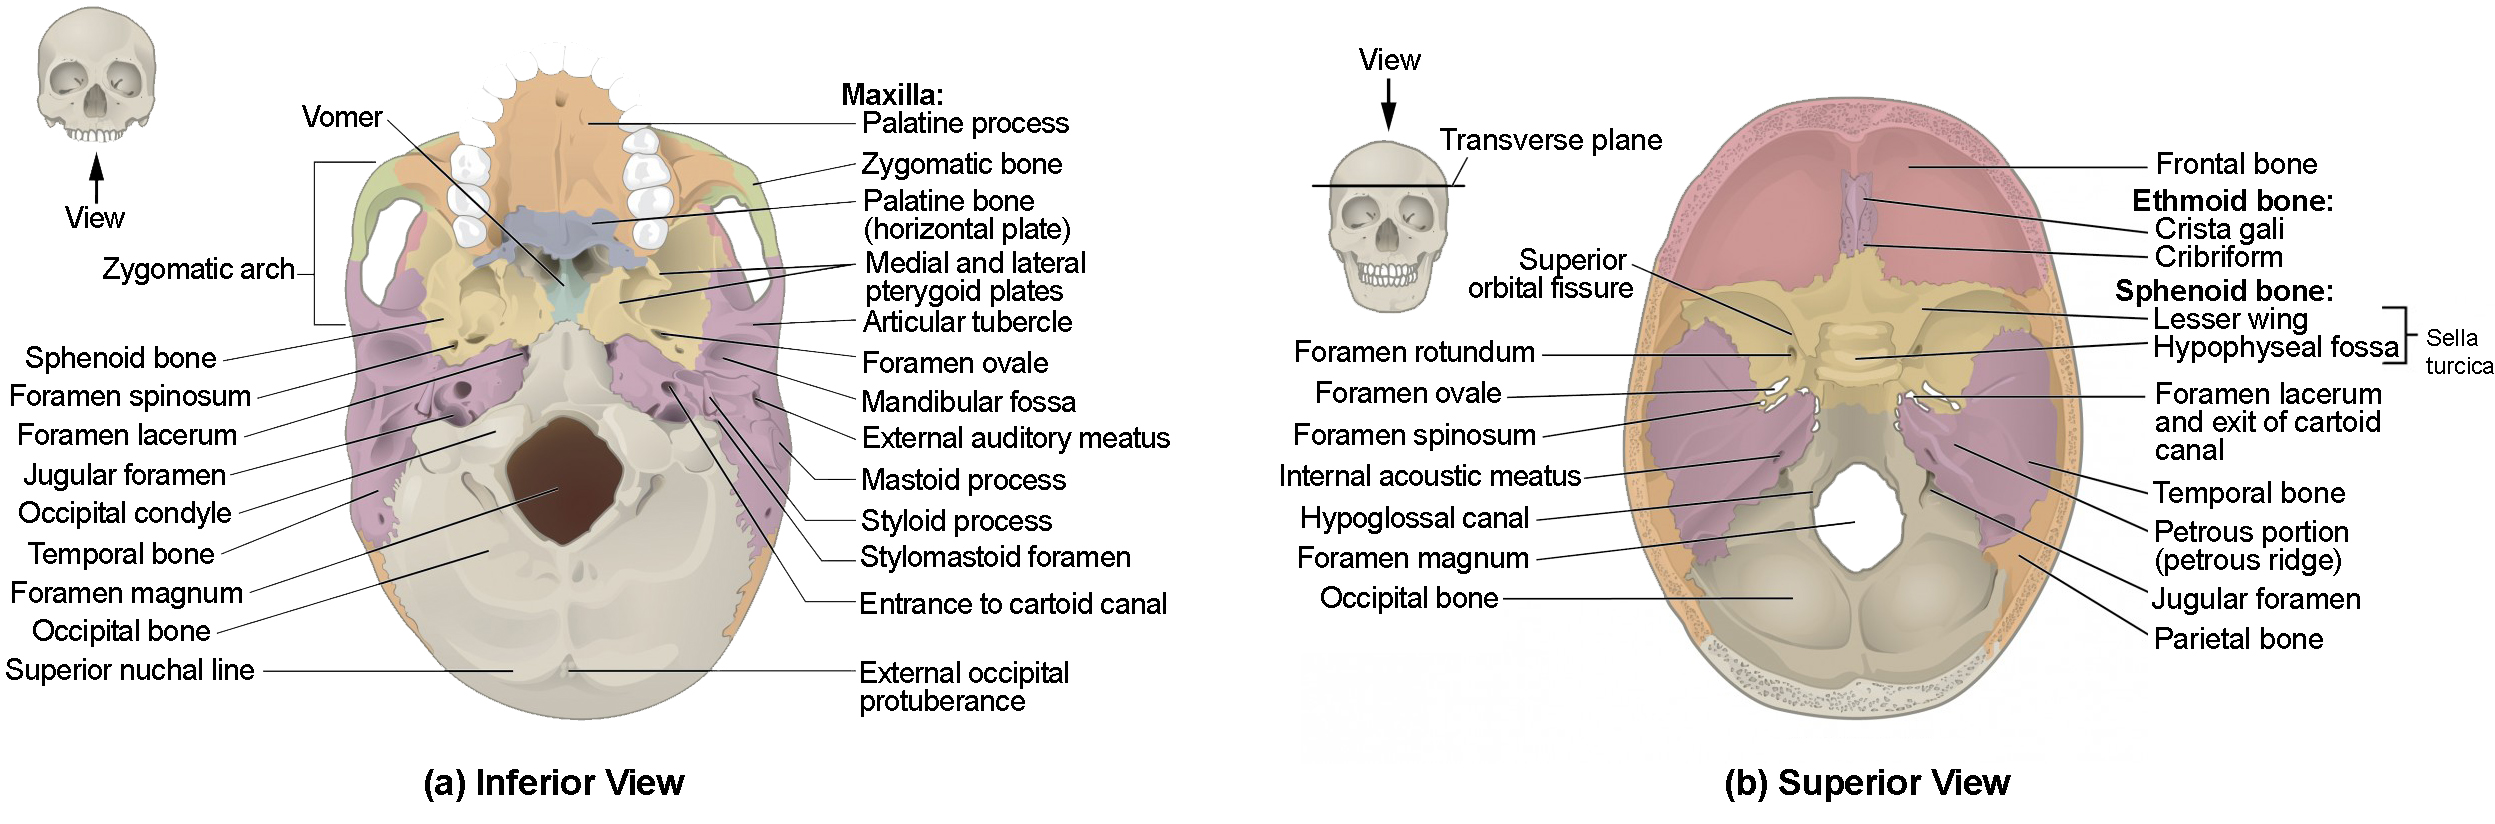 This image shows the superior and inferior view of the skull base. In the top panel, the inferior view is shown. A small image of the skull shows the viewing direction on the left. In the inferior view, the maxilla and the associated bones are shown. In the bottom panel, the superior view shows the ethmoid and sphenoid bones and their subparts.